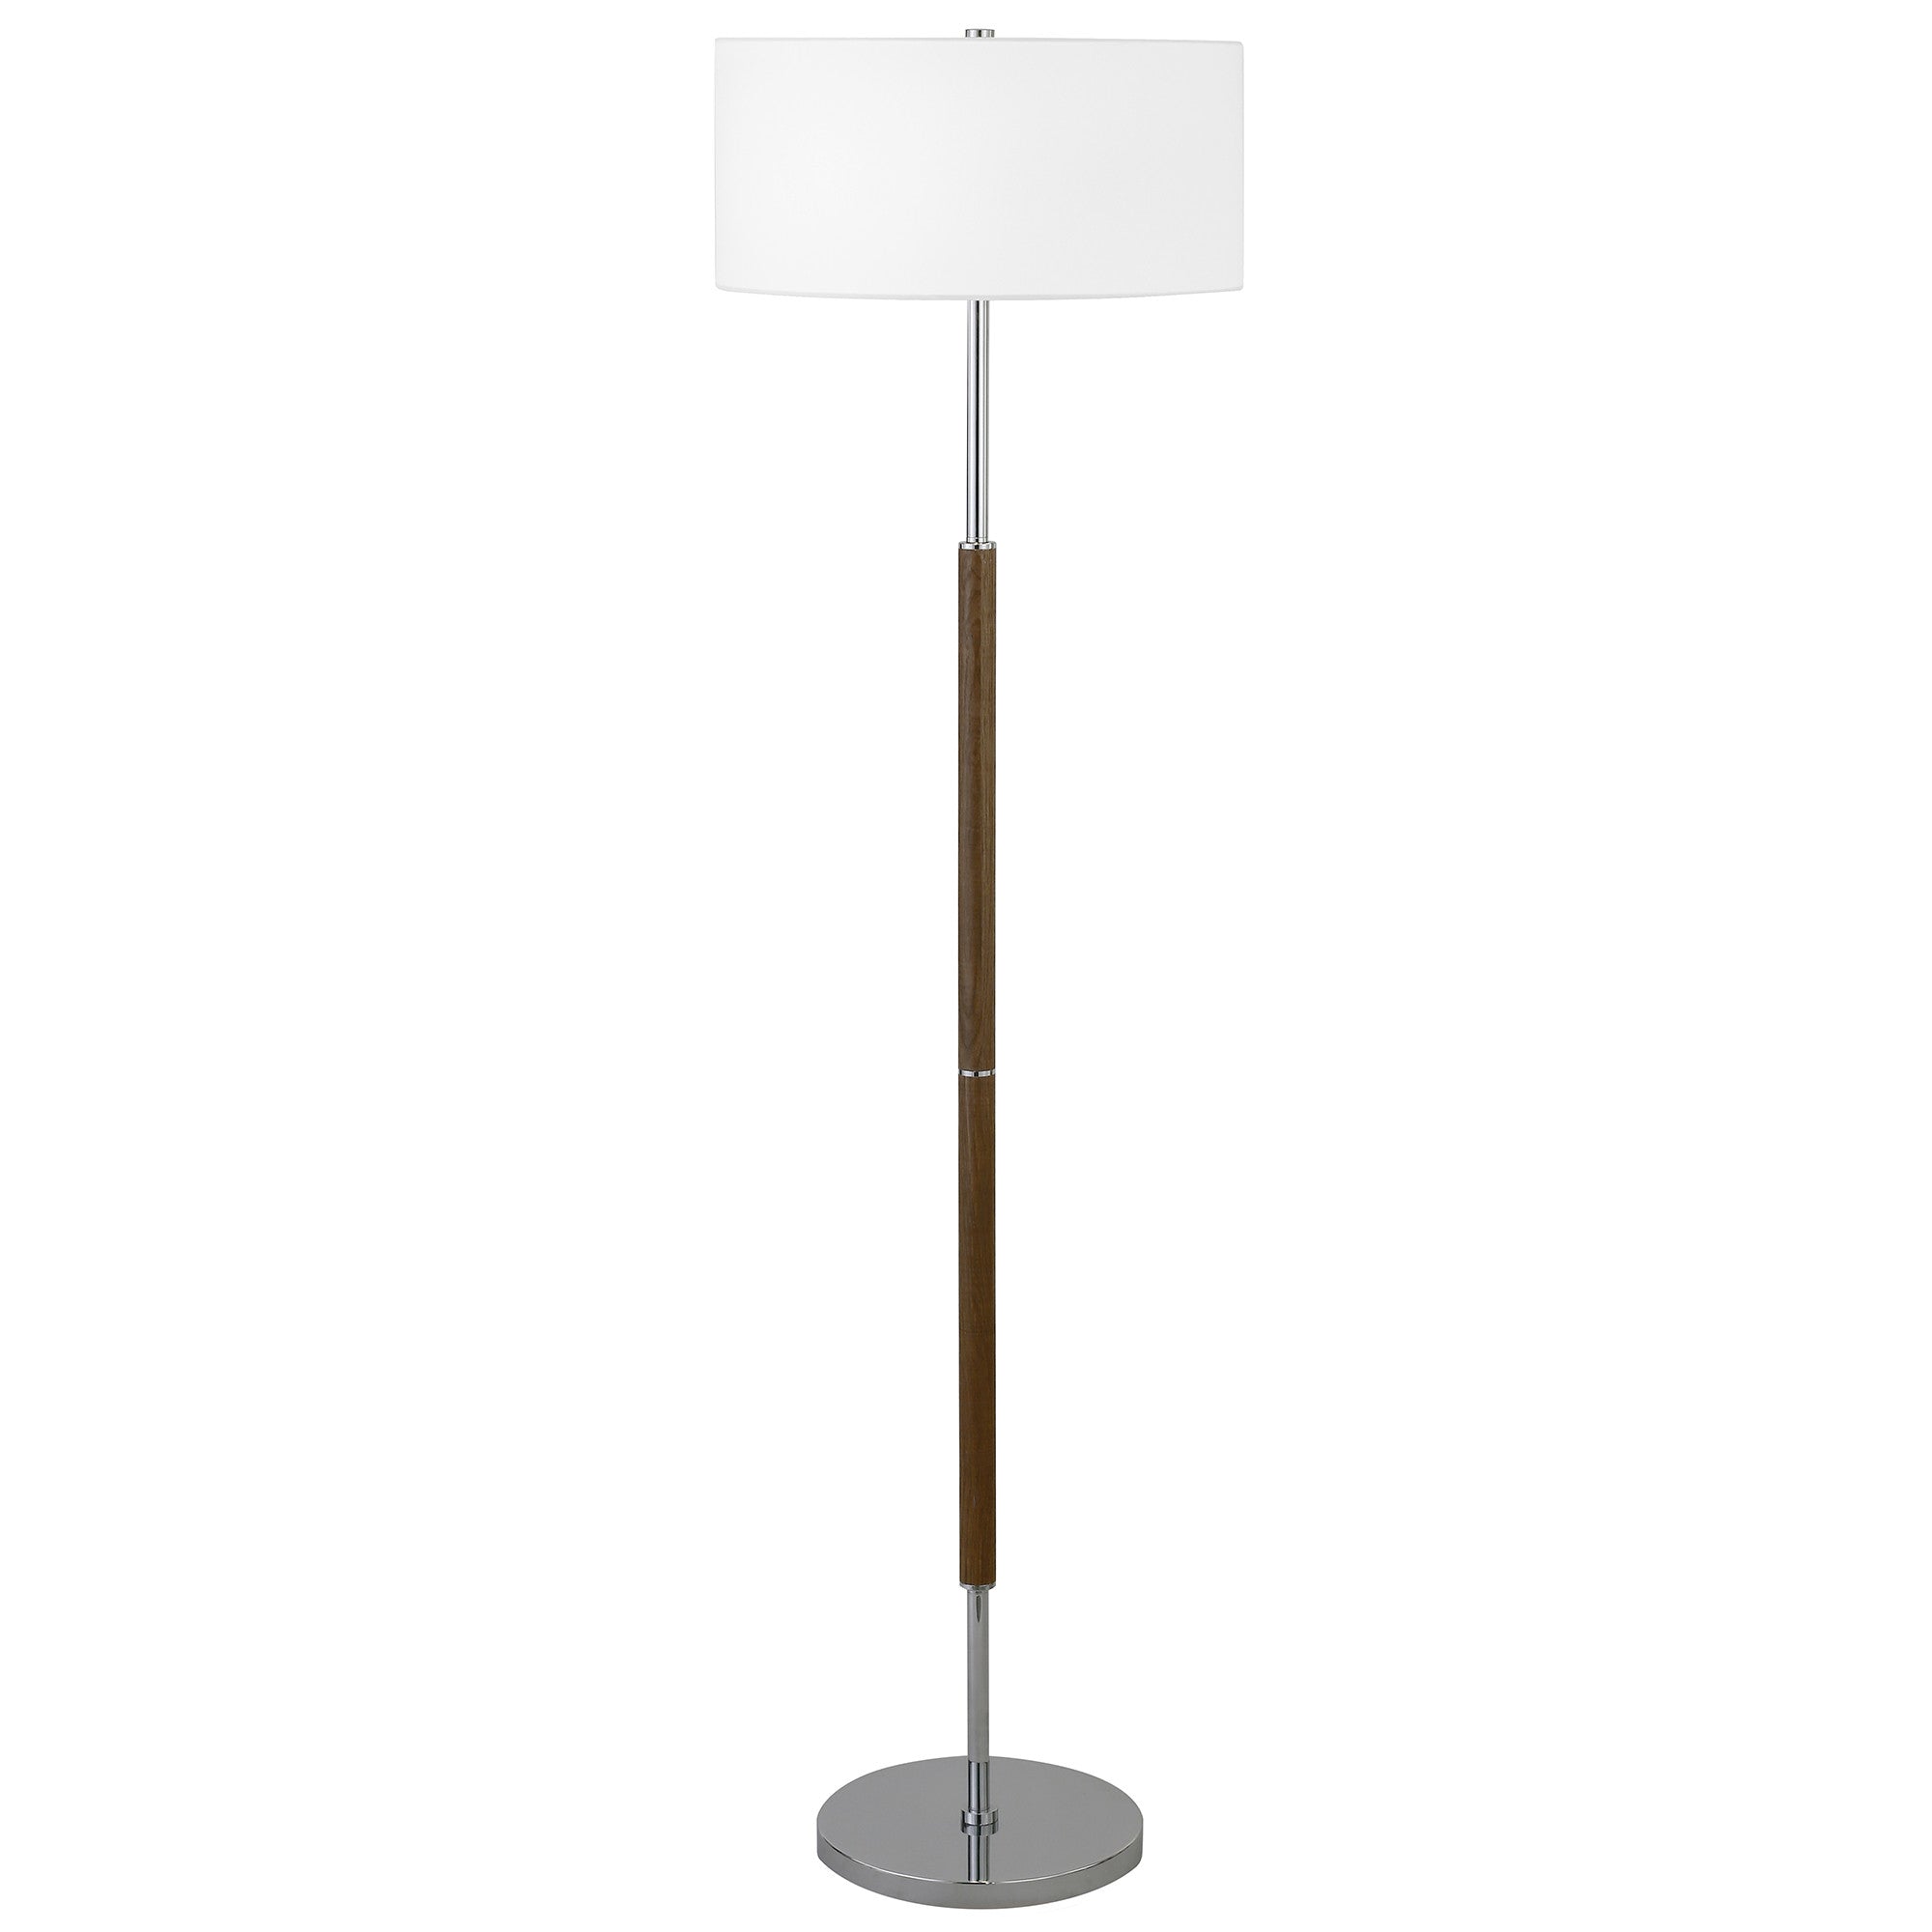 61" Nickel Two Light Floor Lamp With White Frosted Glass Drum Shade